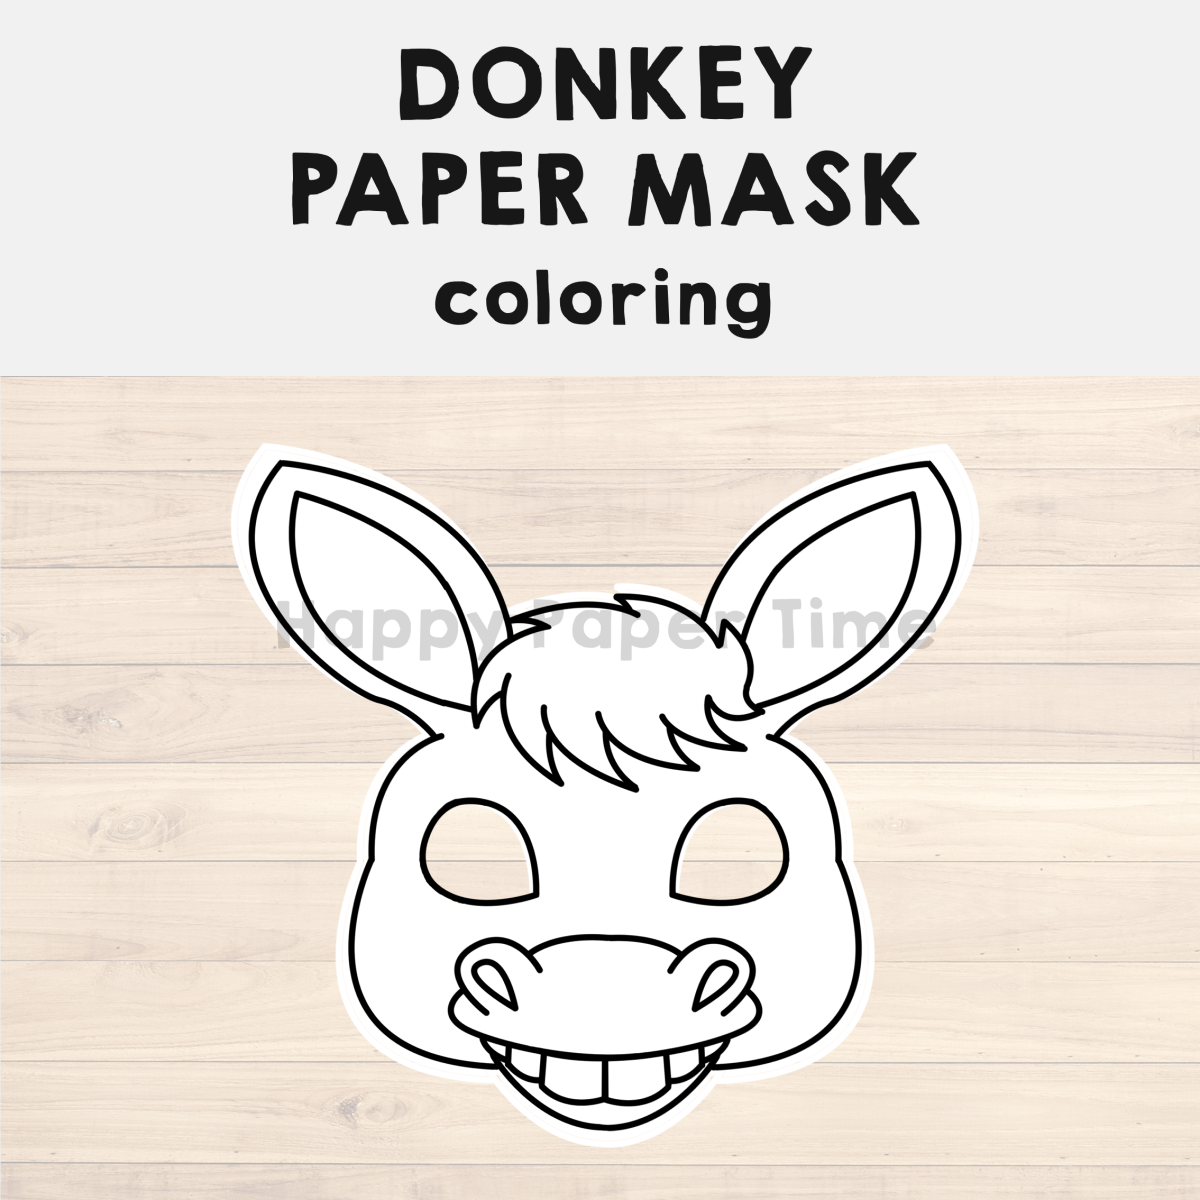 Donkey paper mask printable farm animal coloring craft activity costume made by teachers